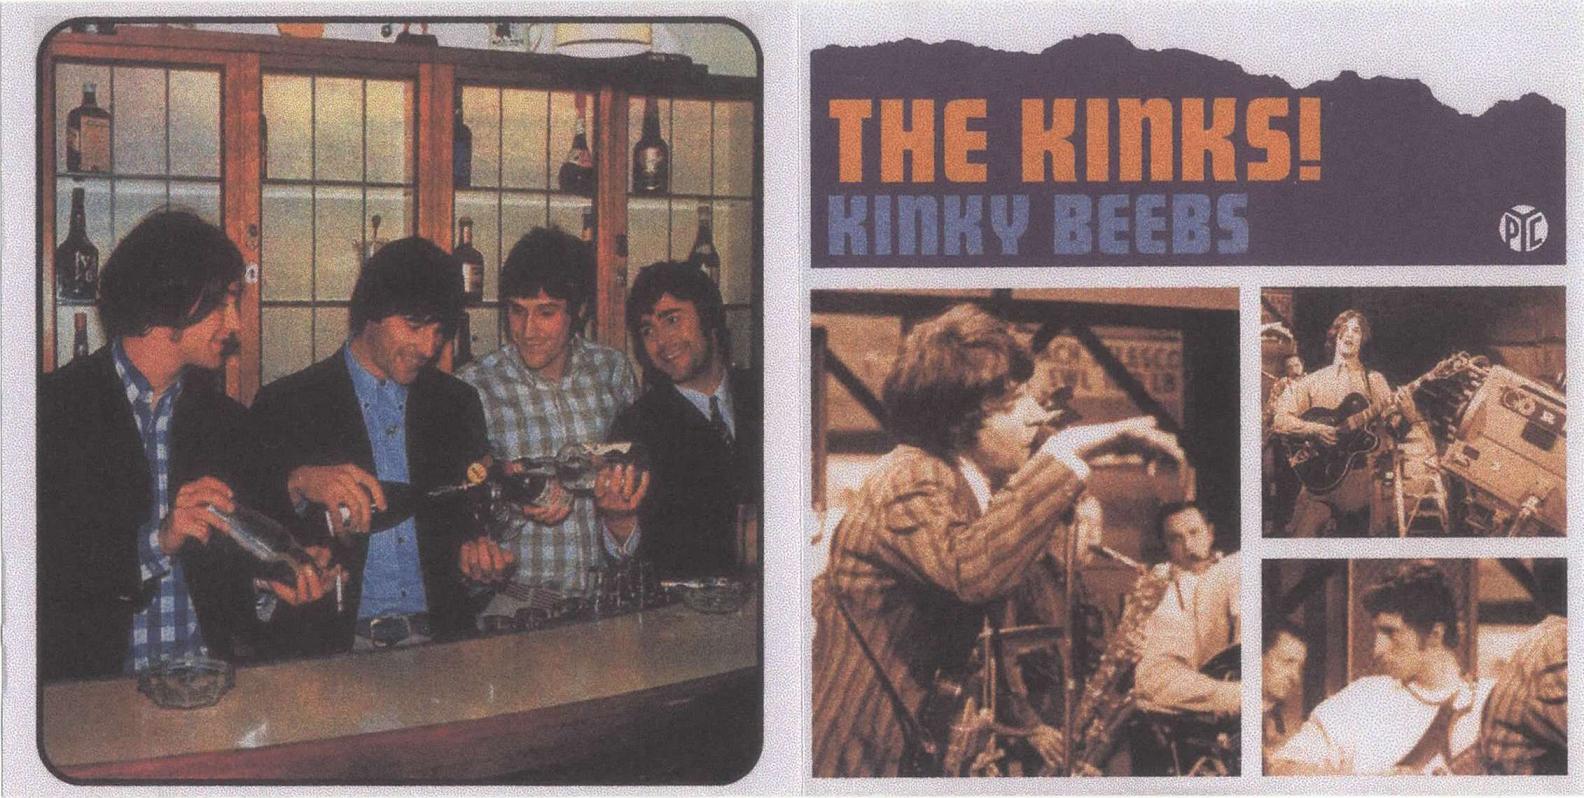 1963-1972-Secret_Sessions_kinky_beebs-front